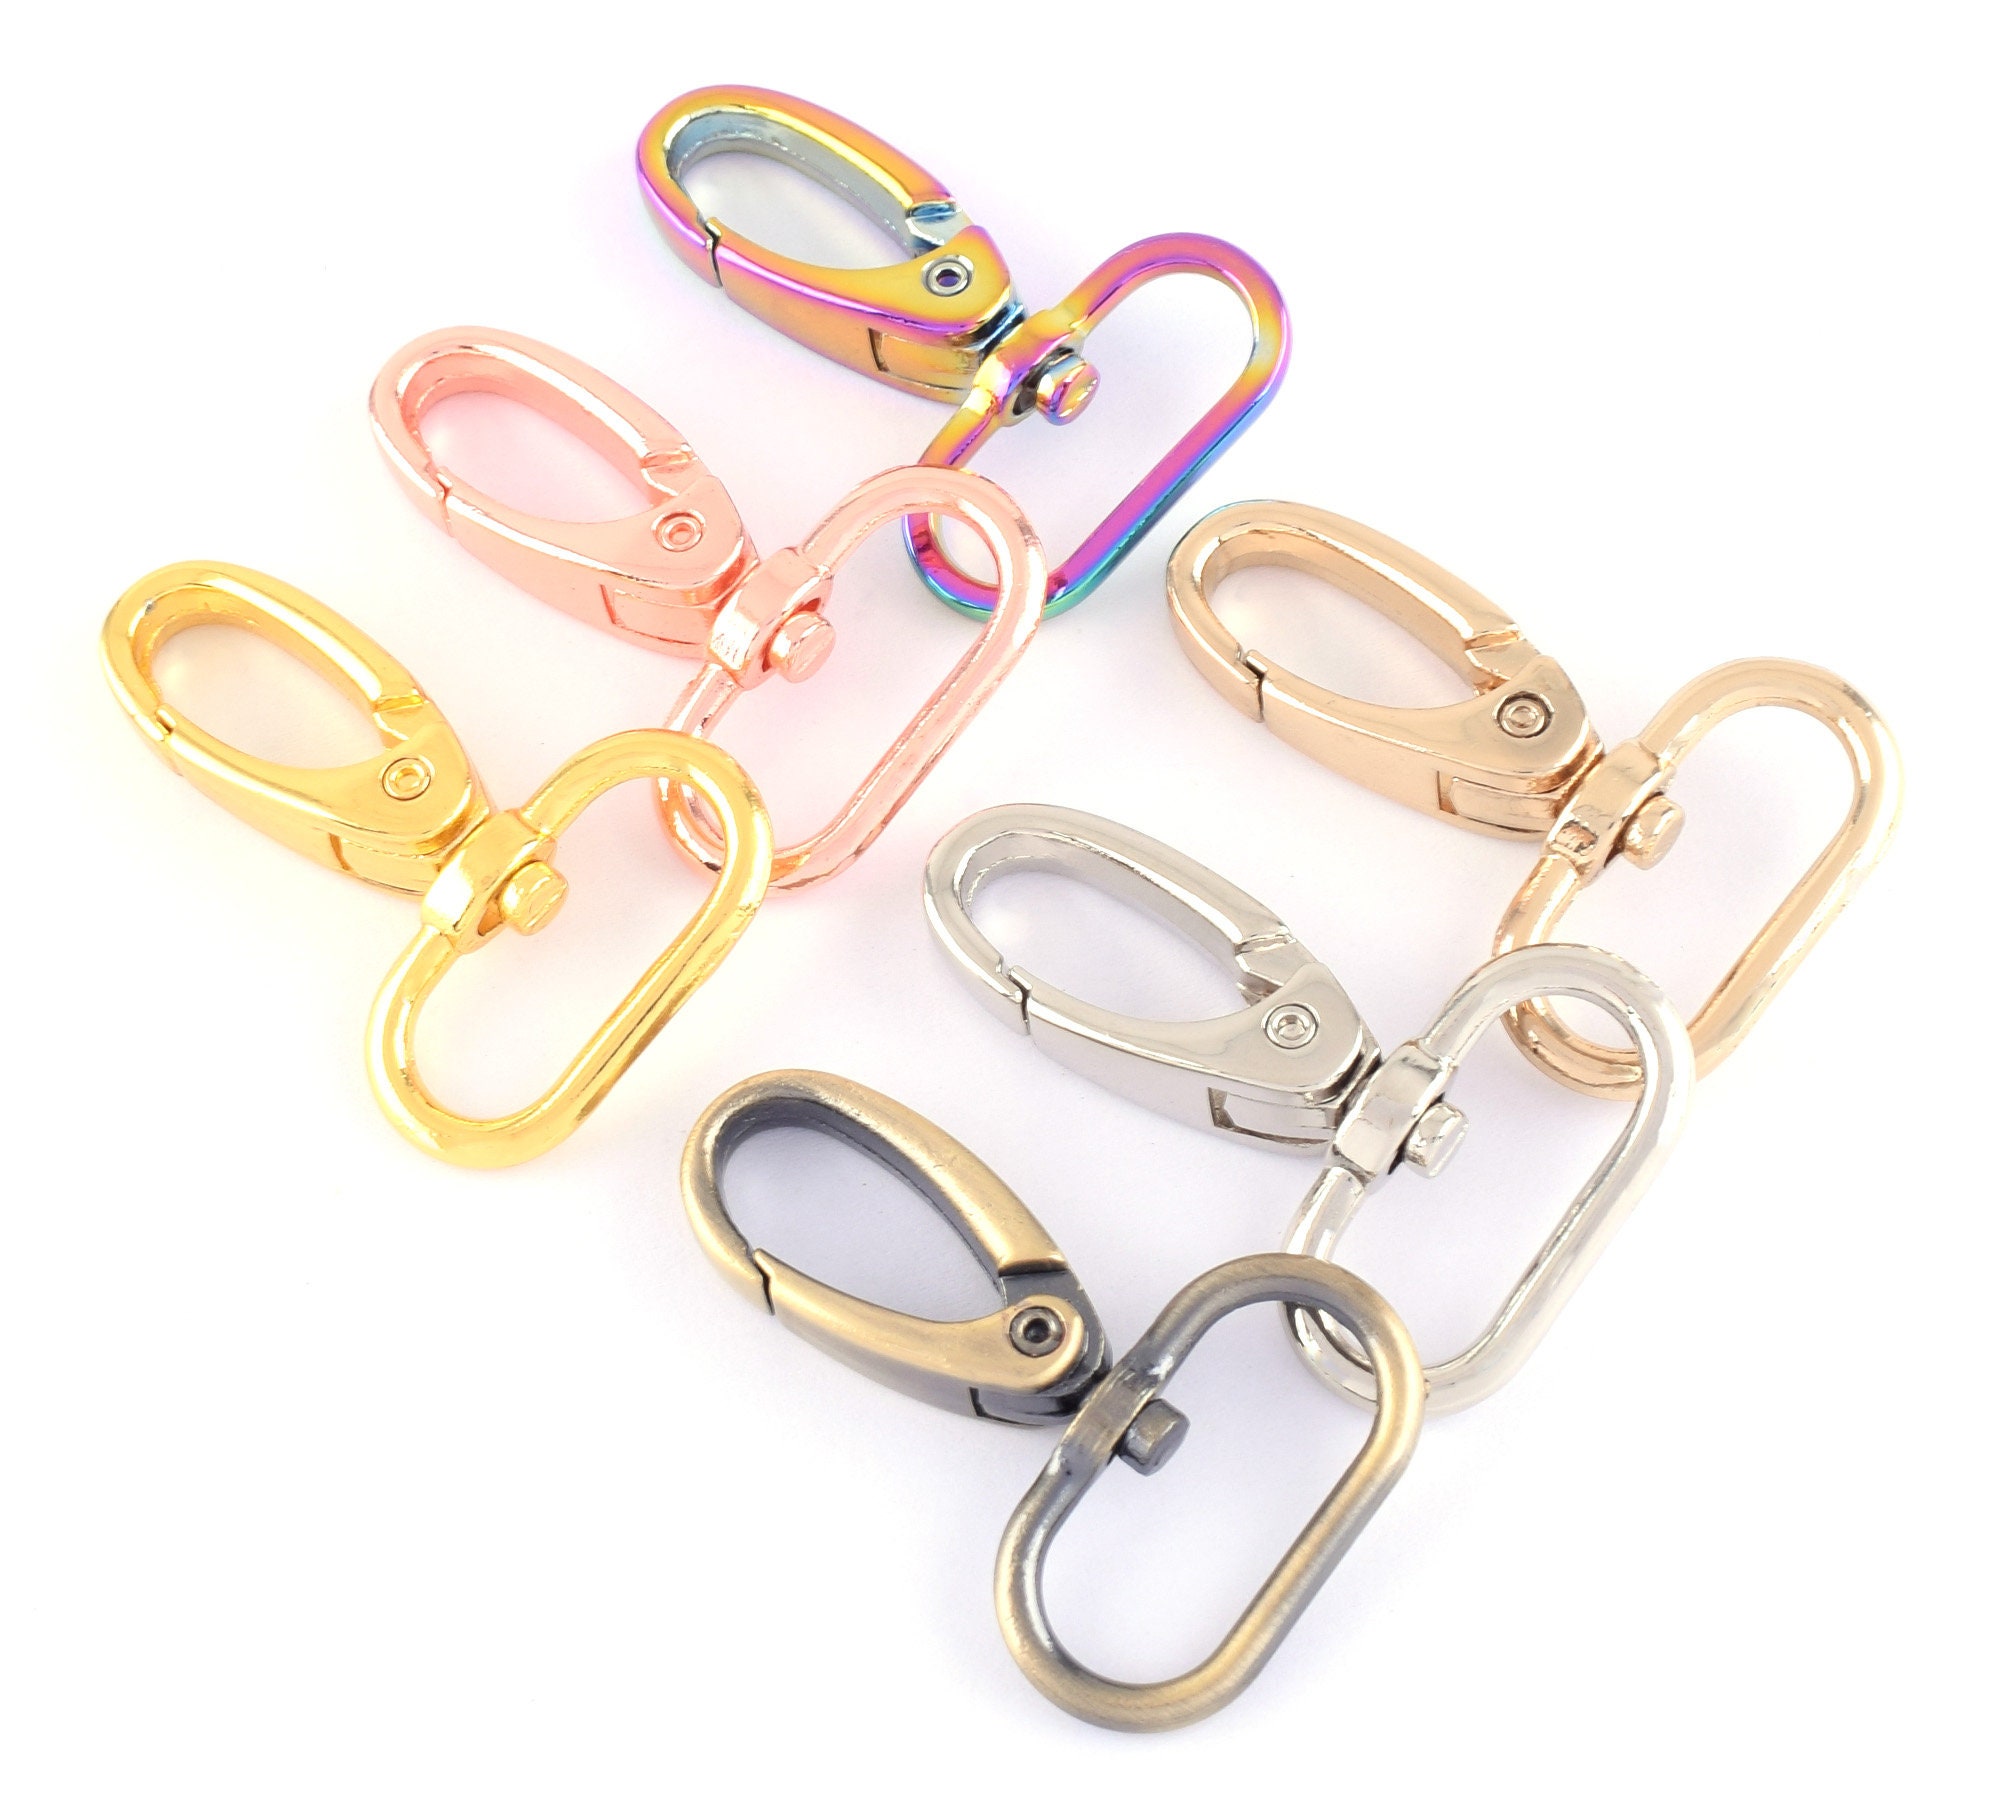 Buy 25mm Swivel Clasp Claw Metal Swivel Snap Hook,rainbow Lobster Clasp  Trigger Snap Hook for Purse Strap Bag Strap Handbag Handle Hardware Online  in India 